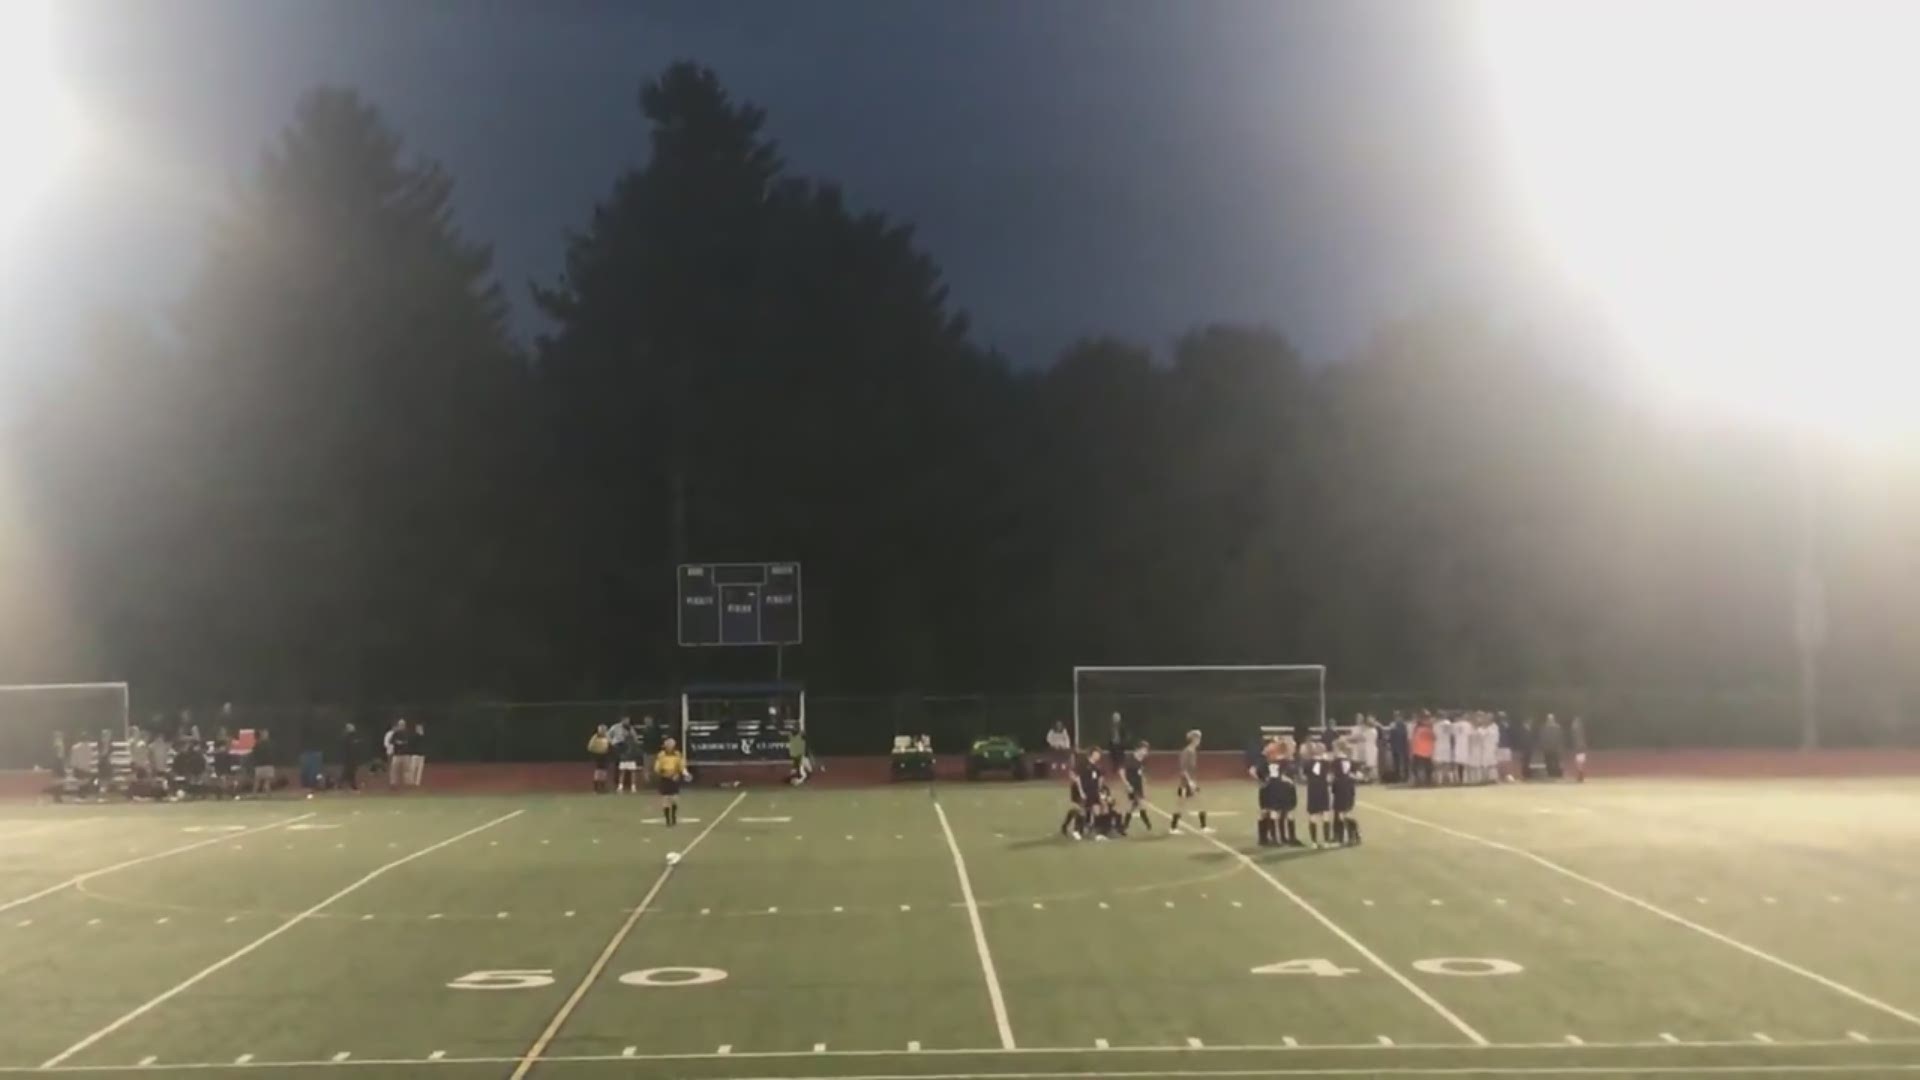 A wheelchair bound Yarmouth soccer player scored an unorthodox goal all while being cheered by his competitors